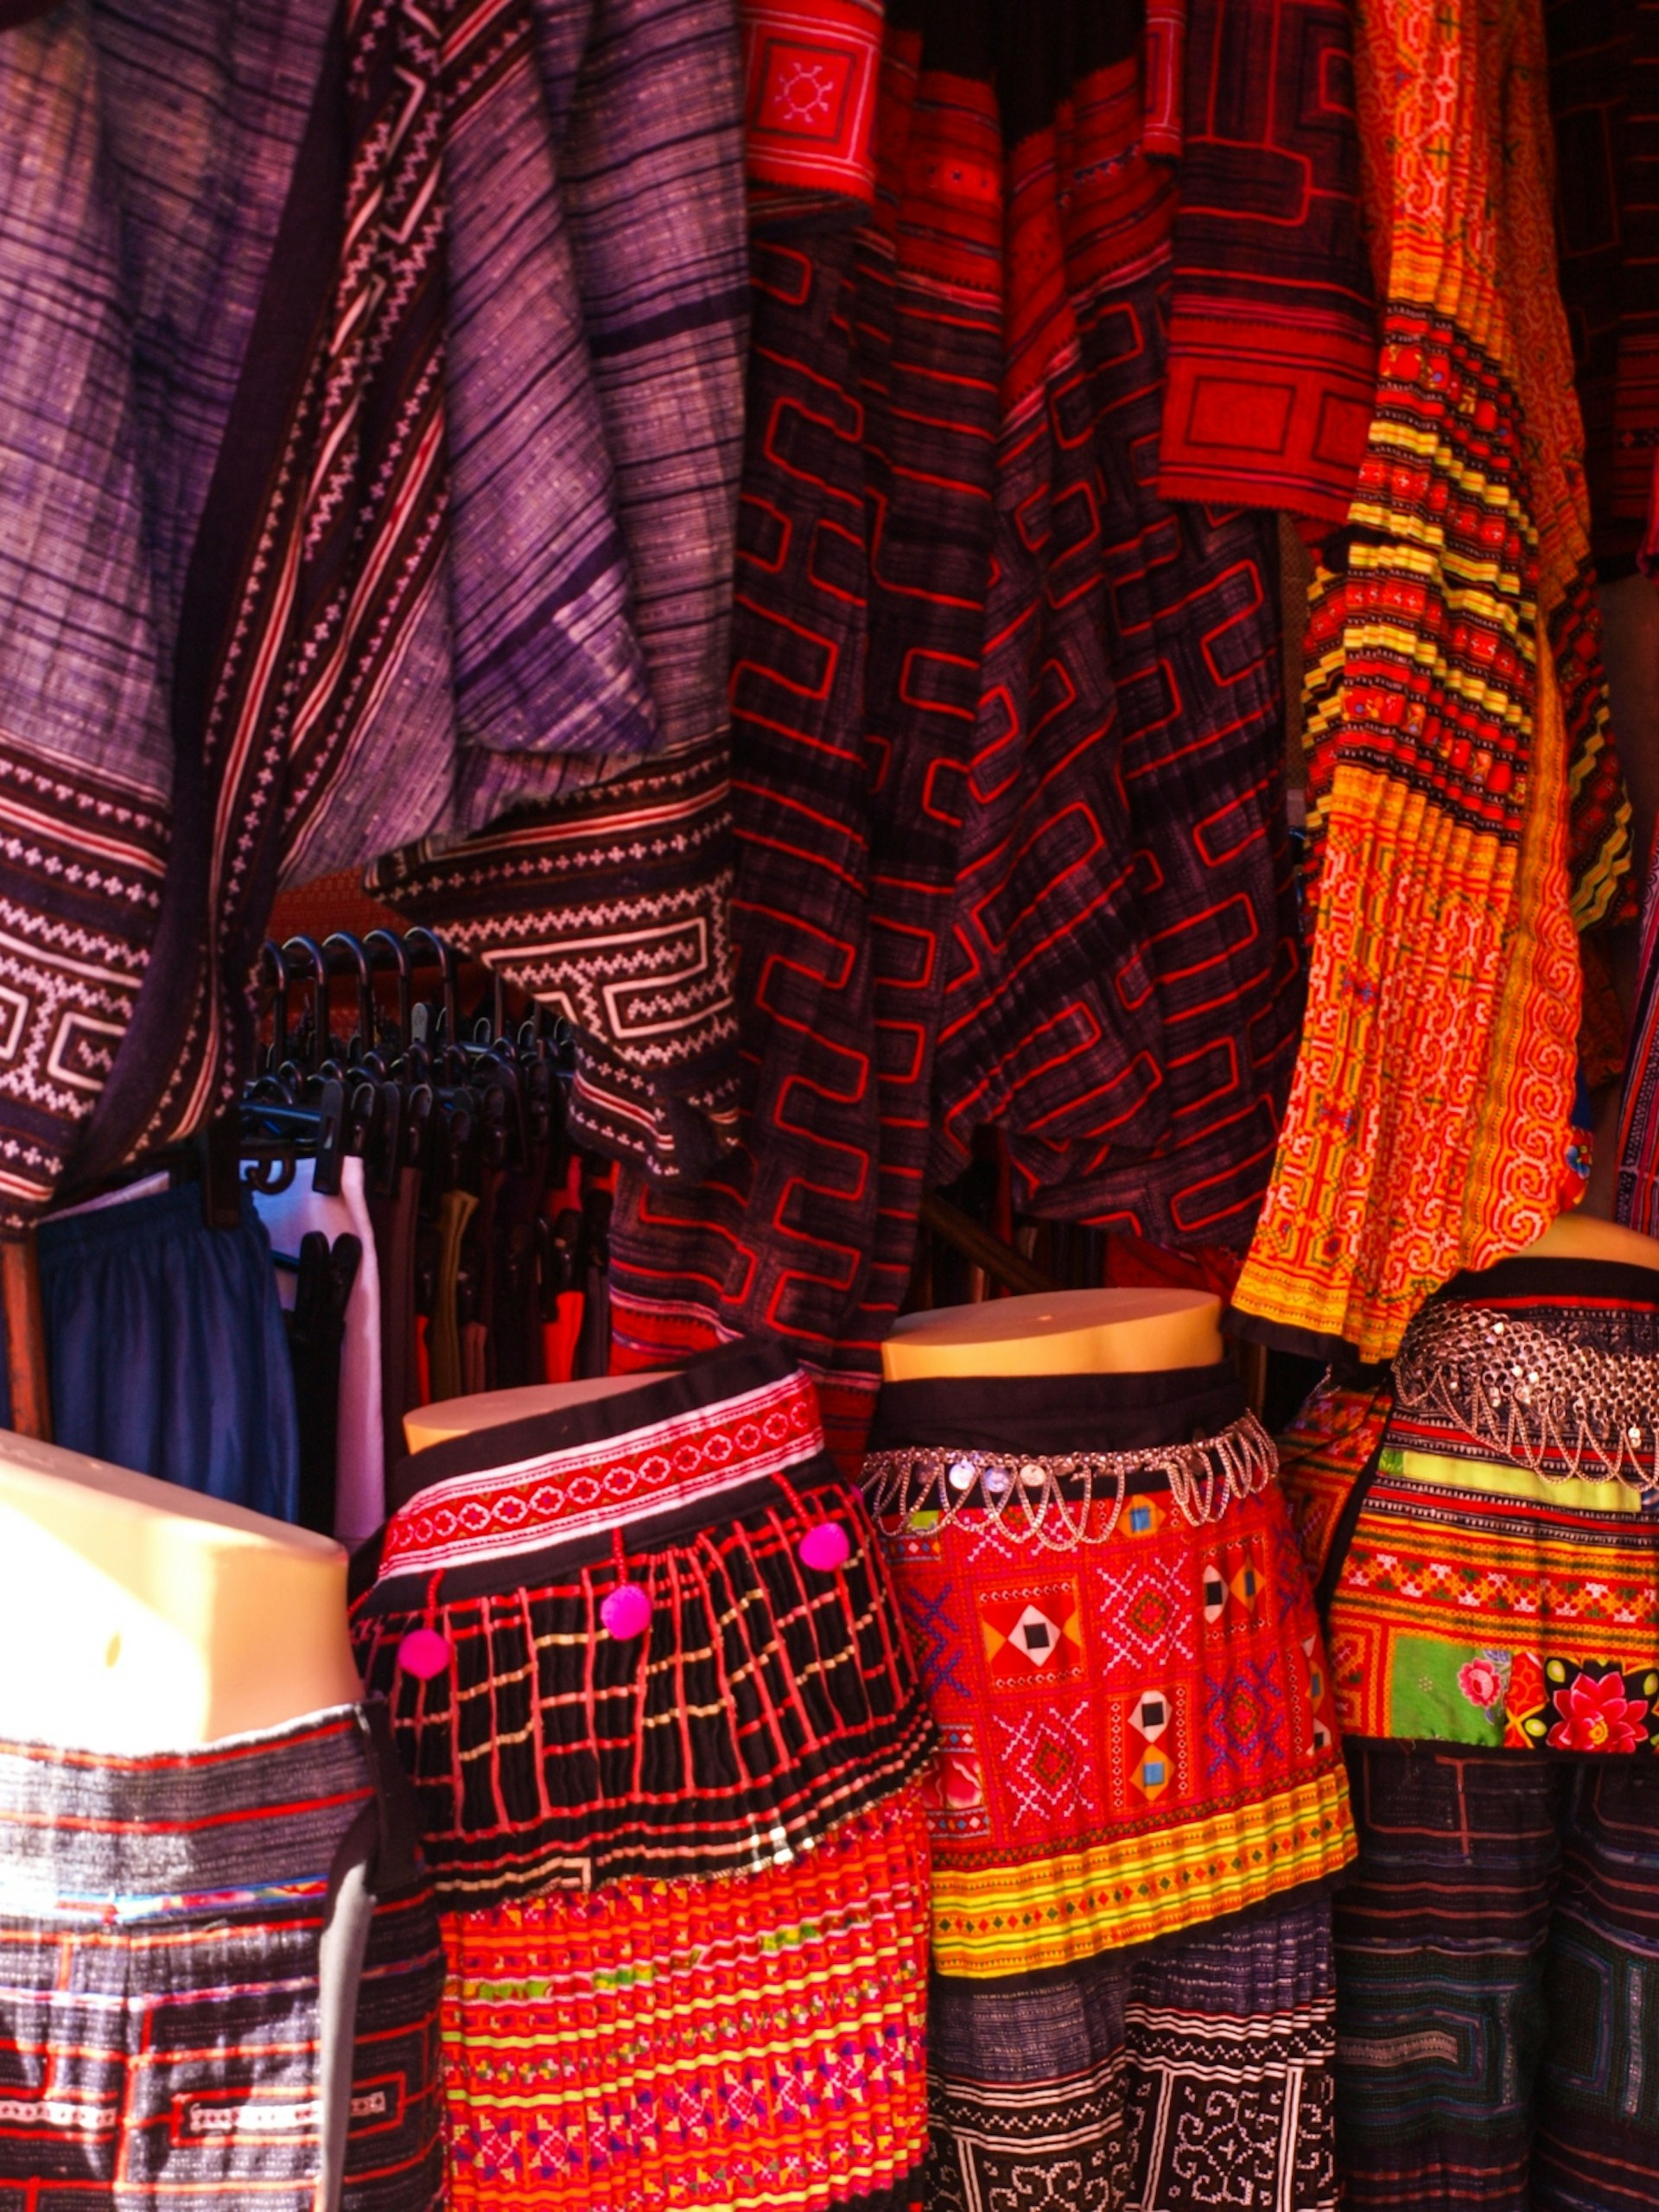 Colourful textiles handmade by Thai hill tribe members on display at a markets in Chiang Mai © gururugu / Getty Images